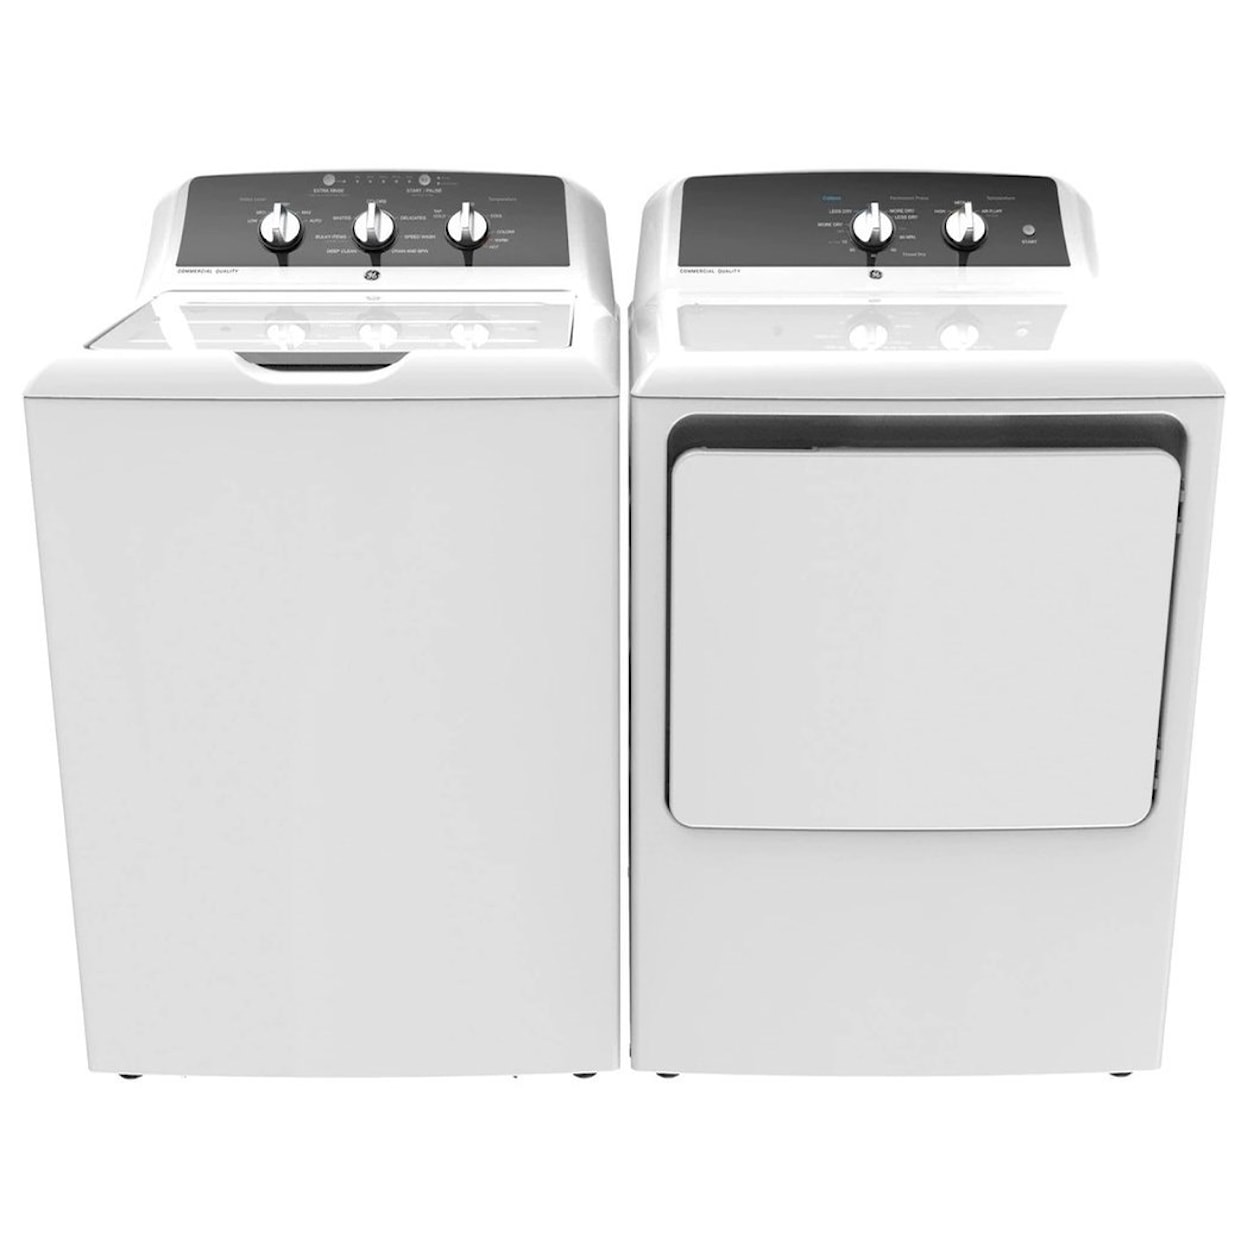 GE Appliances Home Laundry 6.2 cu. ft. Capacity Electric Dryer